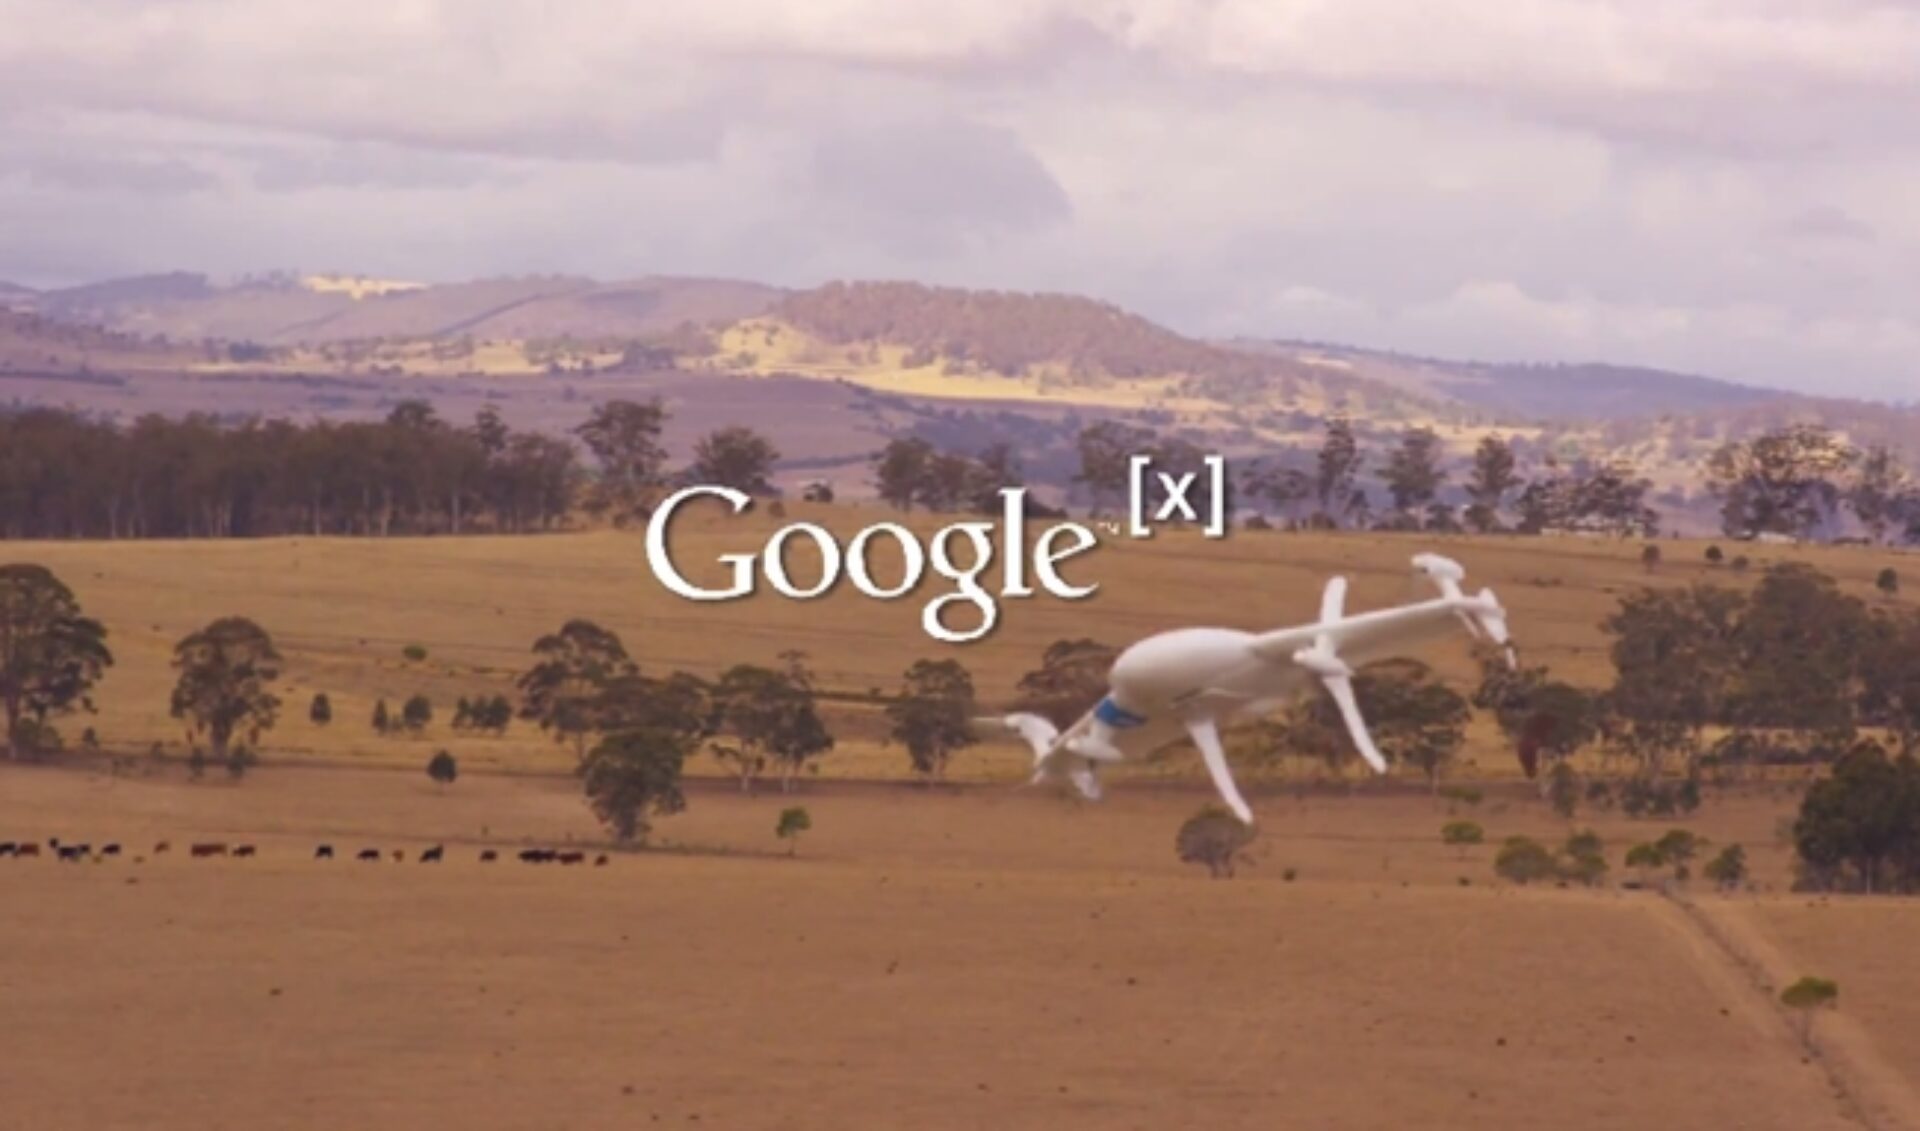 Google Wows Viewers With Its Project Wing Demo